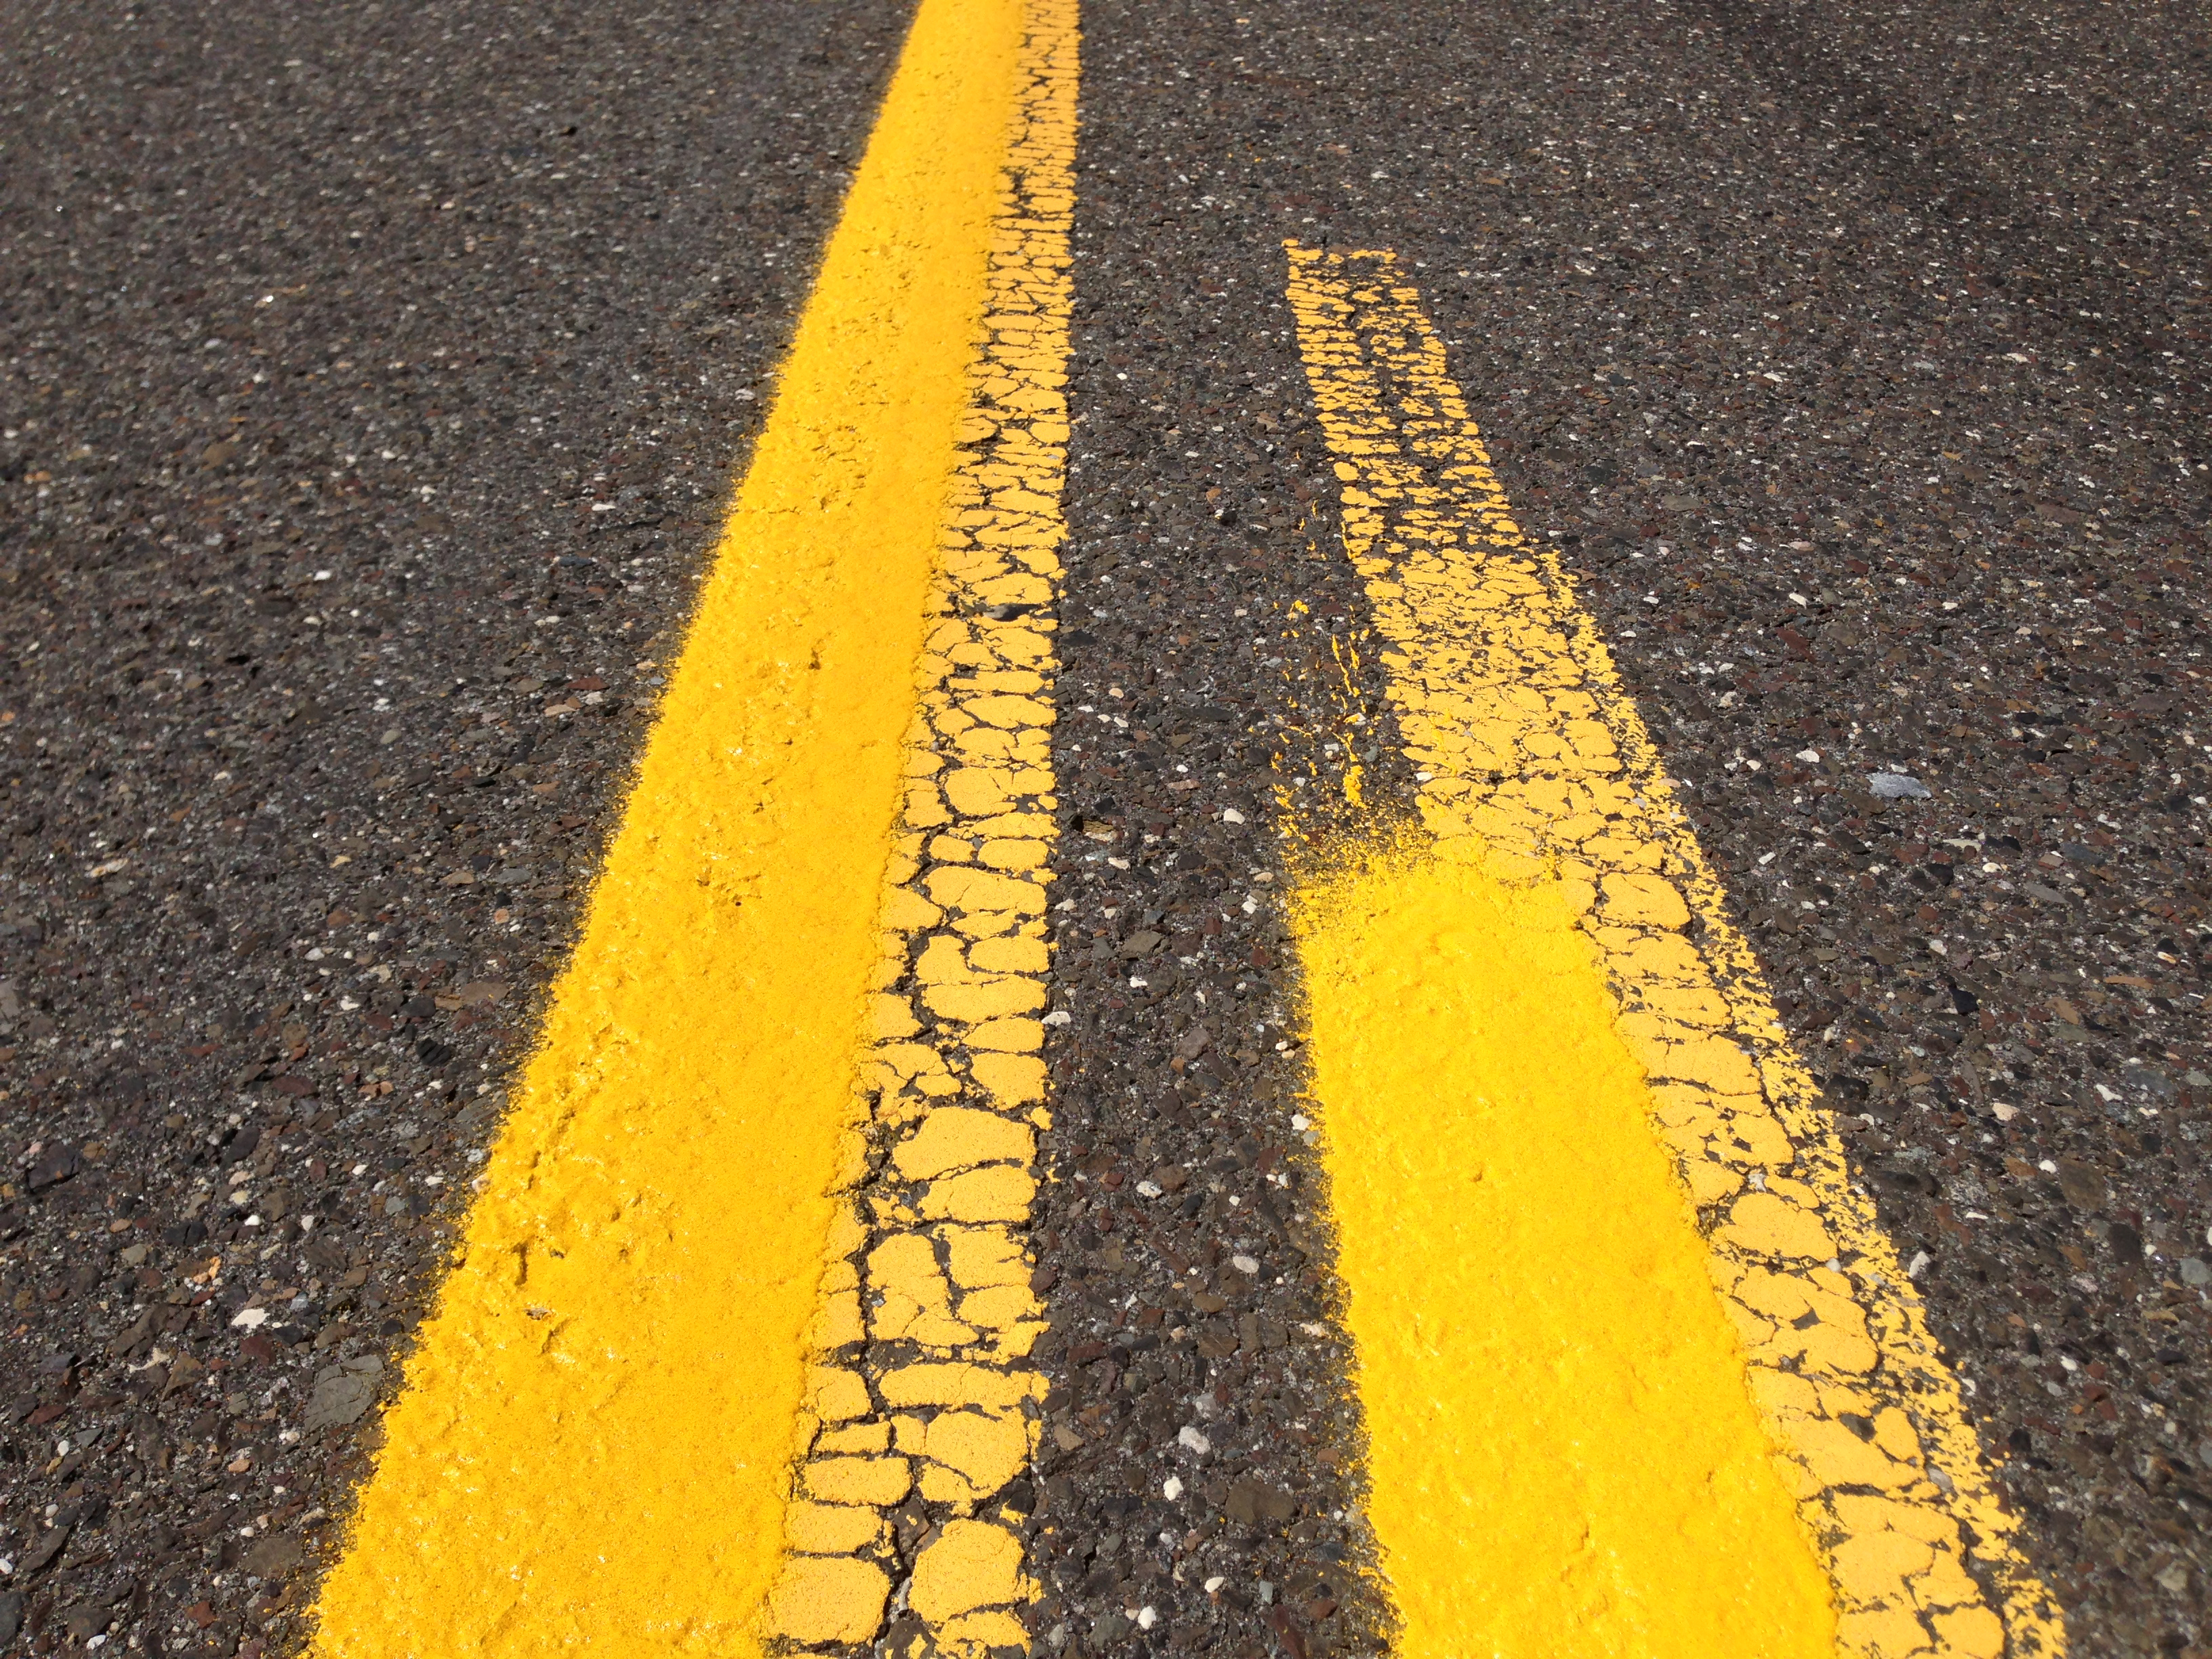 File:2014-08-29 12 58 13 Fresh yellow road paint laid on top of old ...